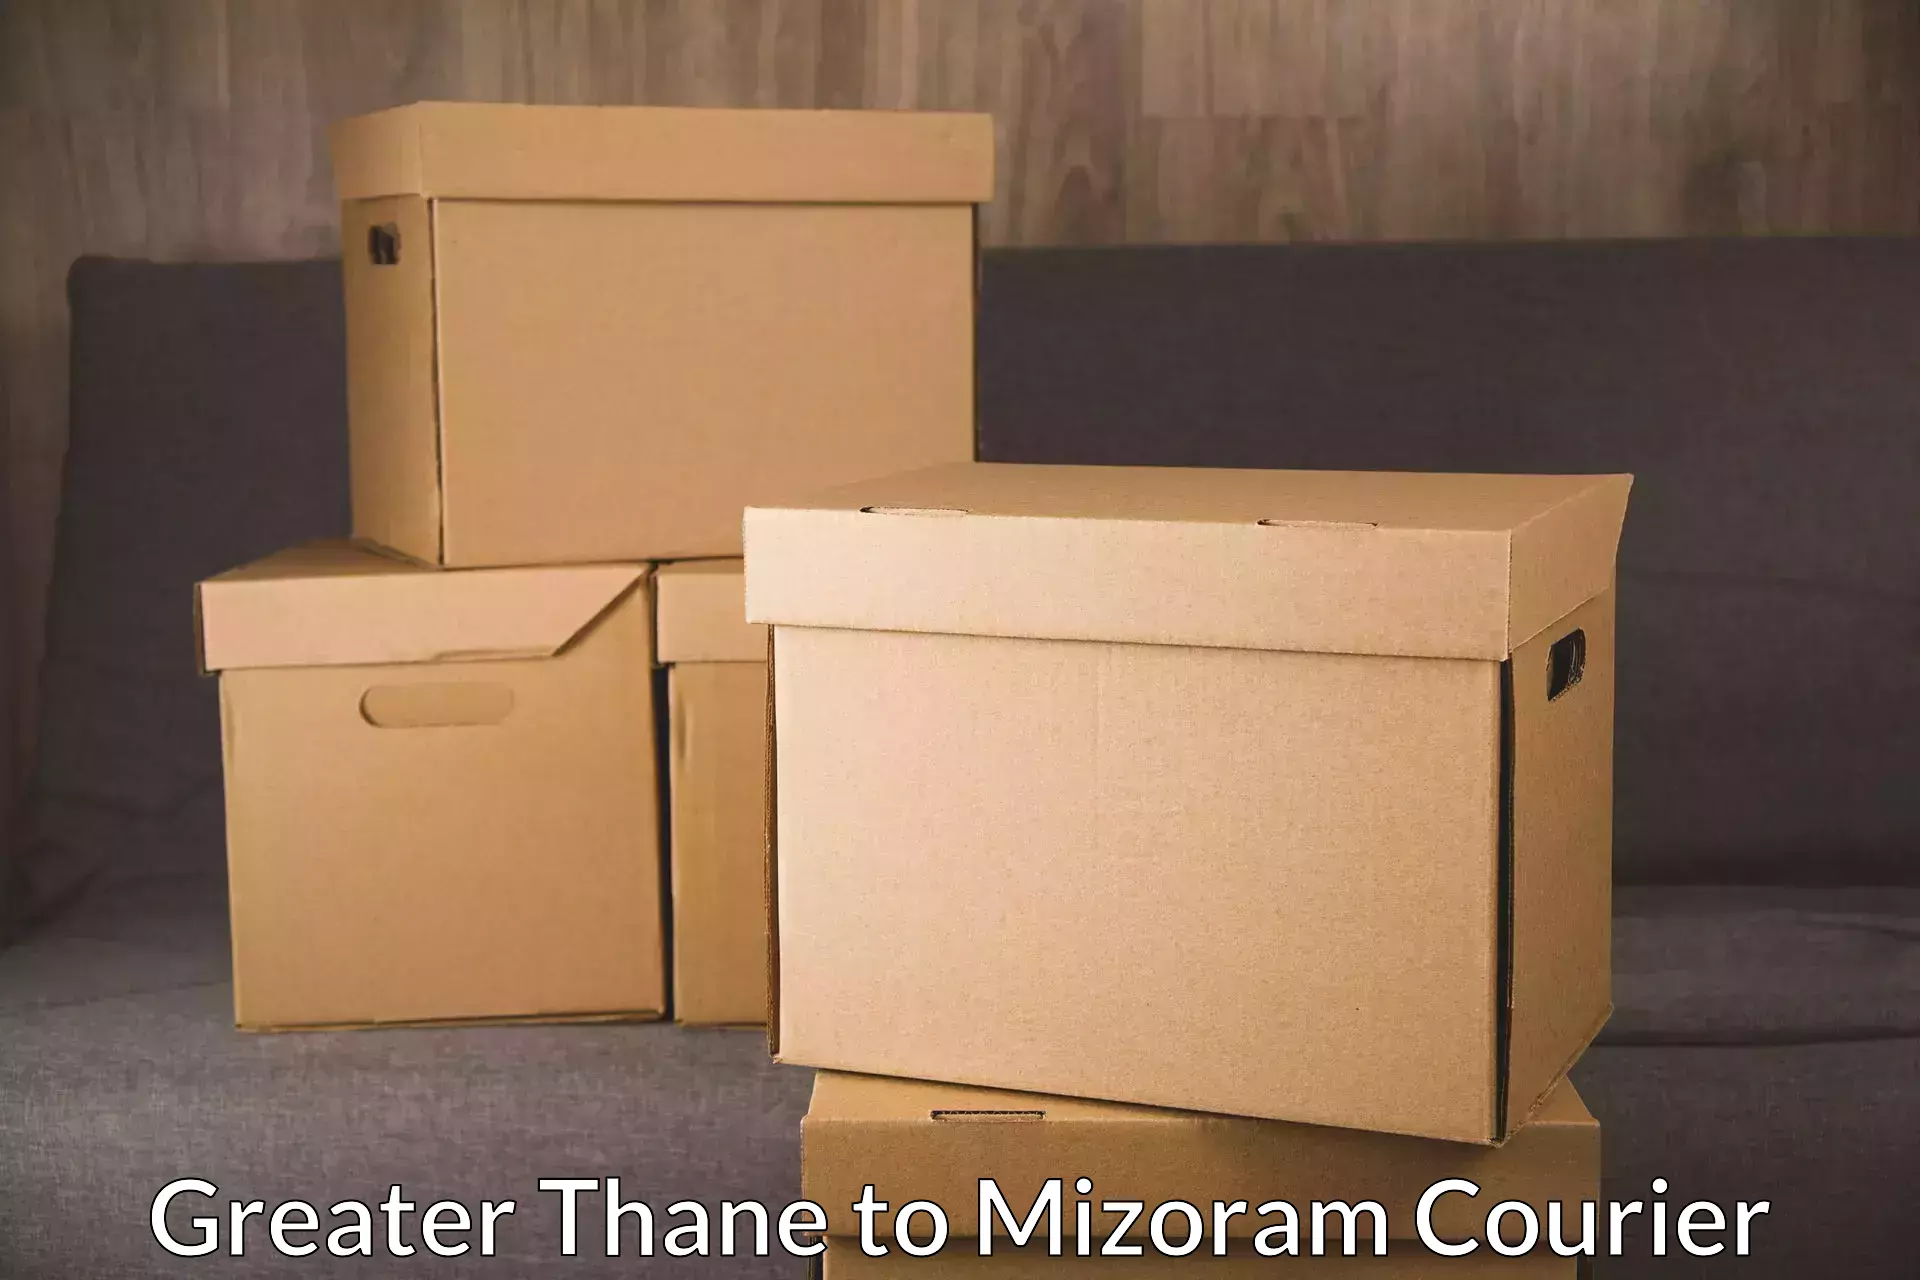 Courier service partnerships Greater Thane to Mizoram